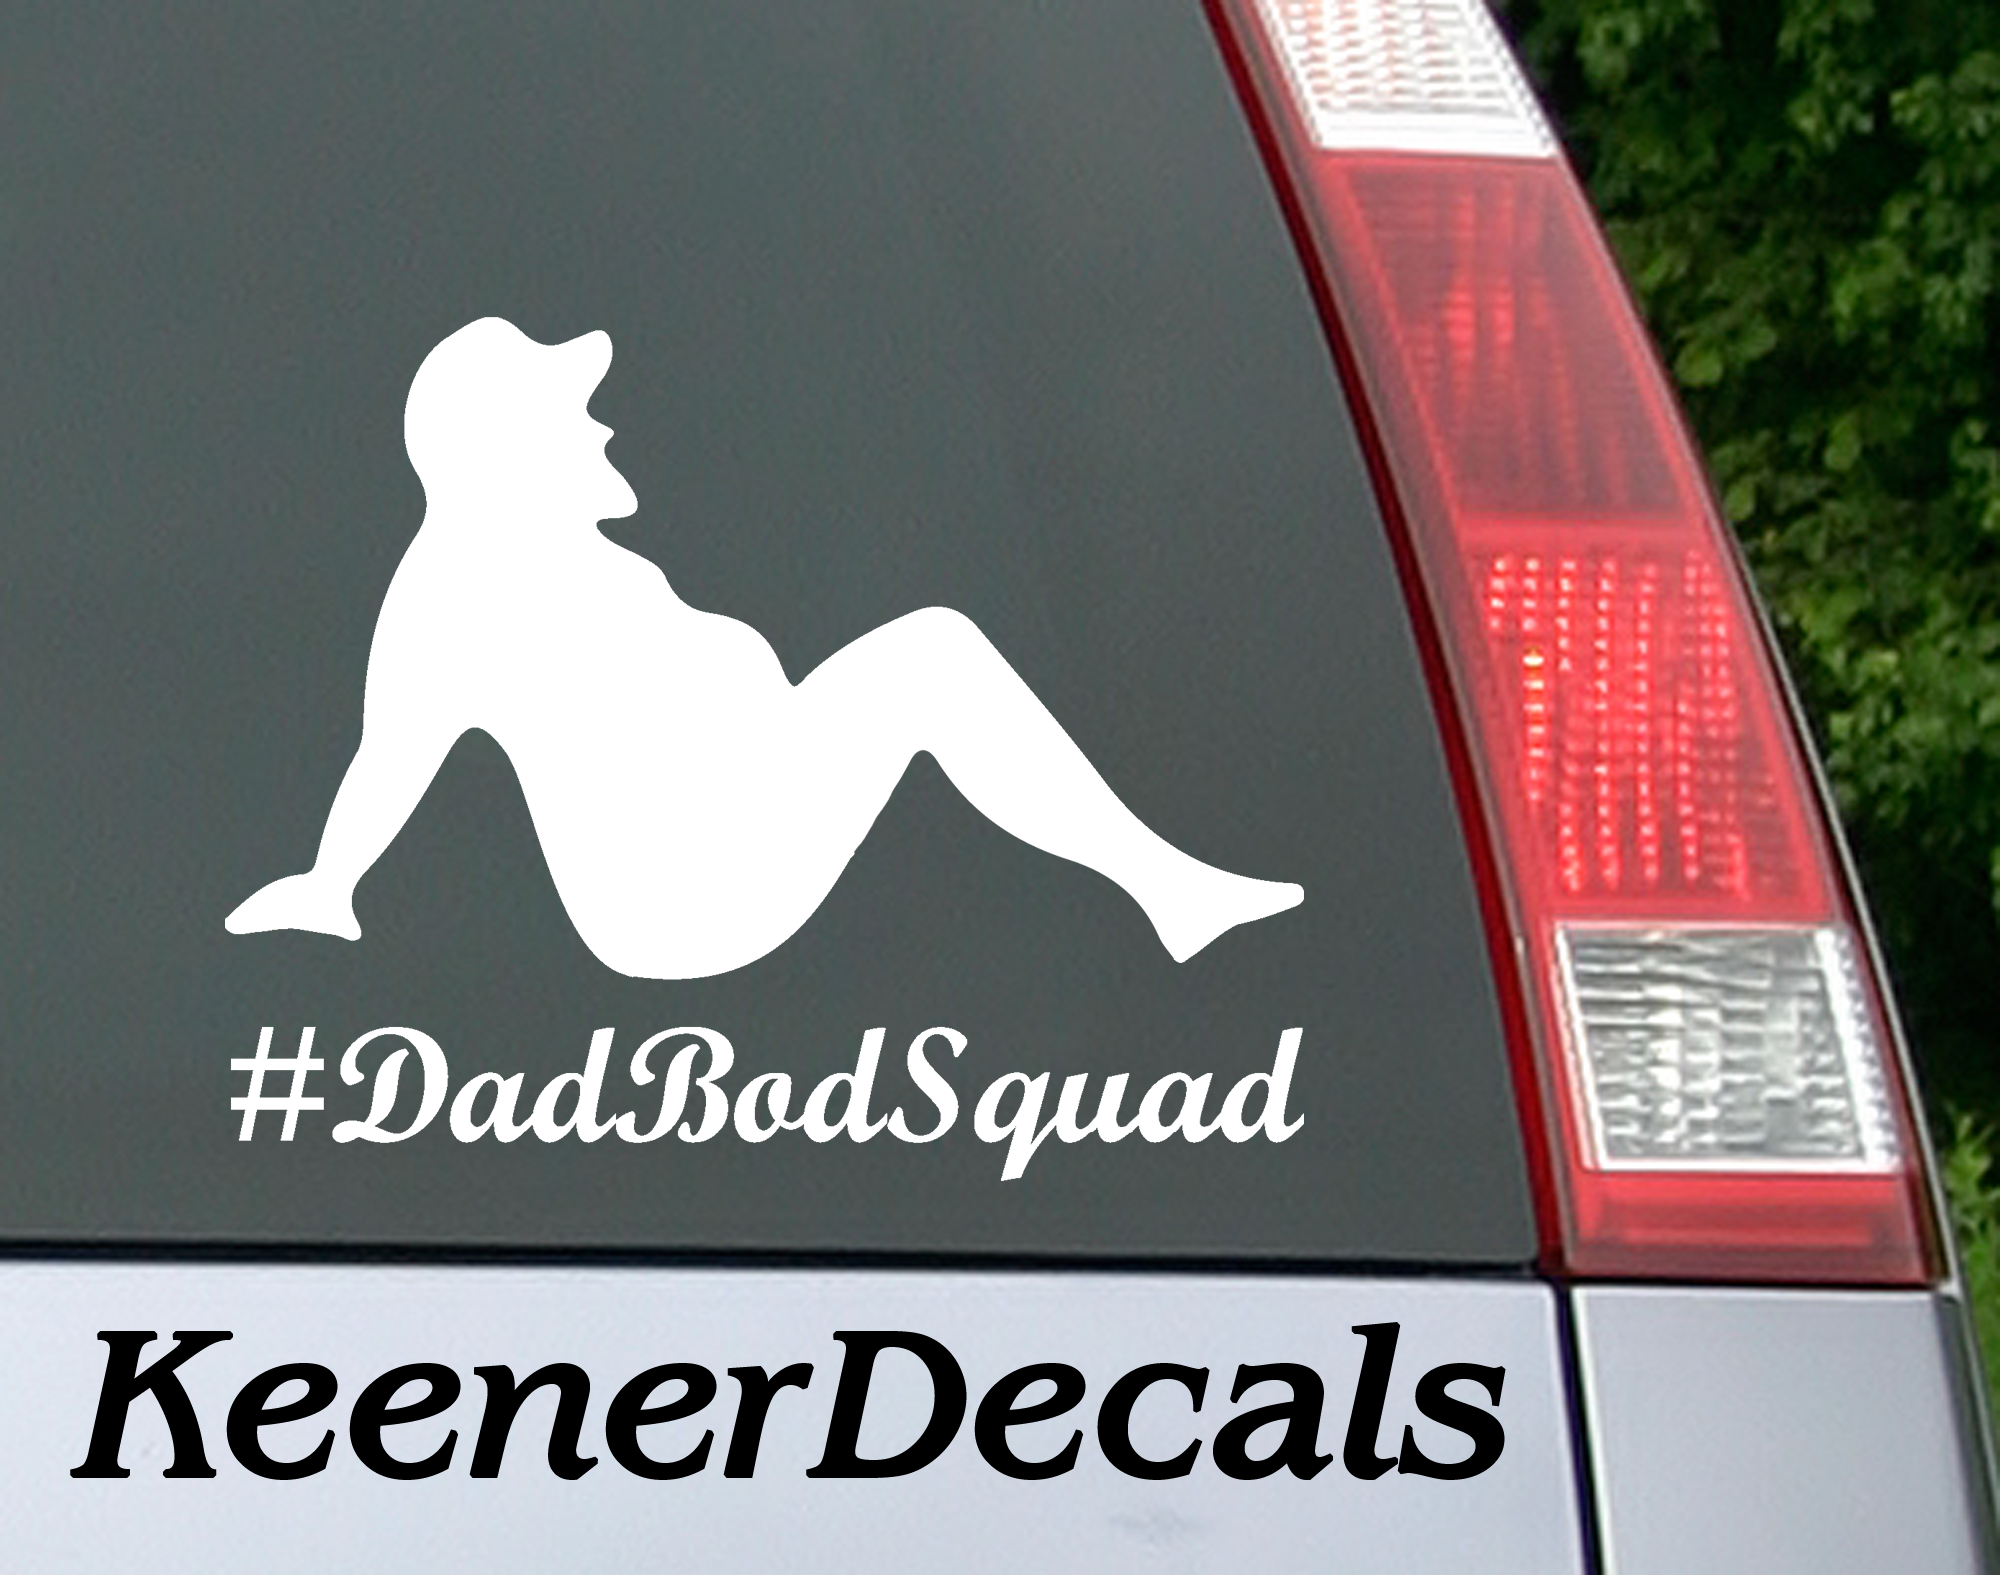 Dad Bod Squad funny car decal. Are you, or someone you know, apart of this elusive club? Get your membership vinyl emblem today.  5"W x 4"H Funny Car Decal, Car Sticker, Car Vinyl, Bumper Sticker, Vinyl Stickers, Vinyl Sticker.